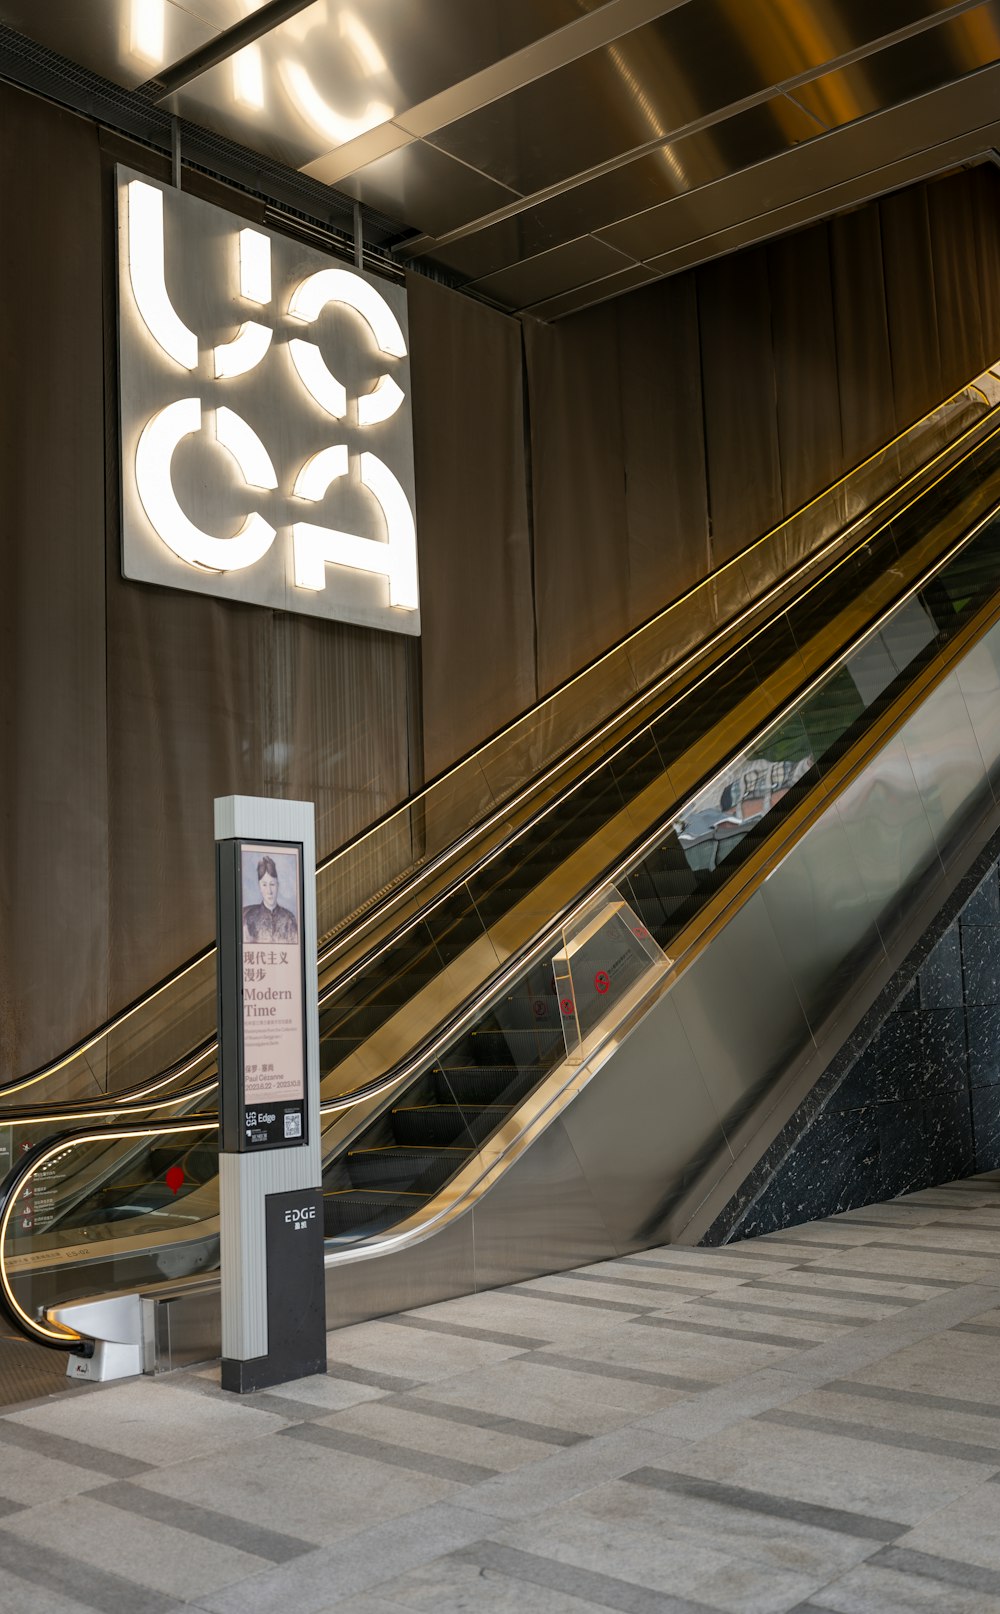 an escalator in a subway station with a sign on the wall